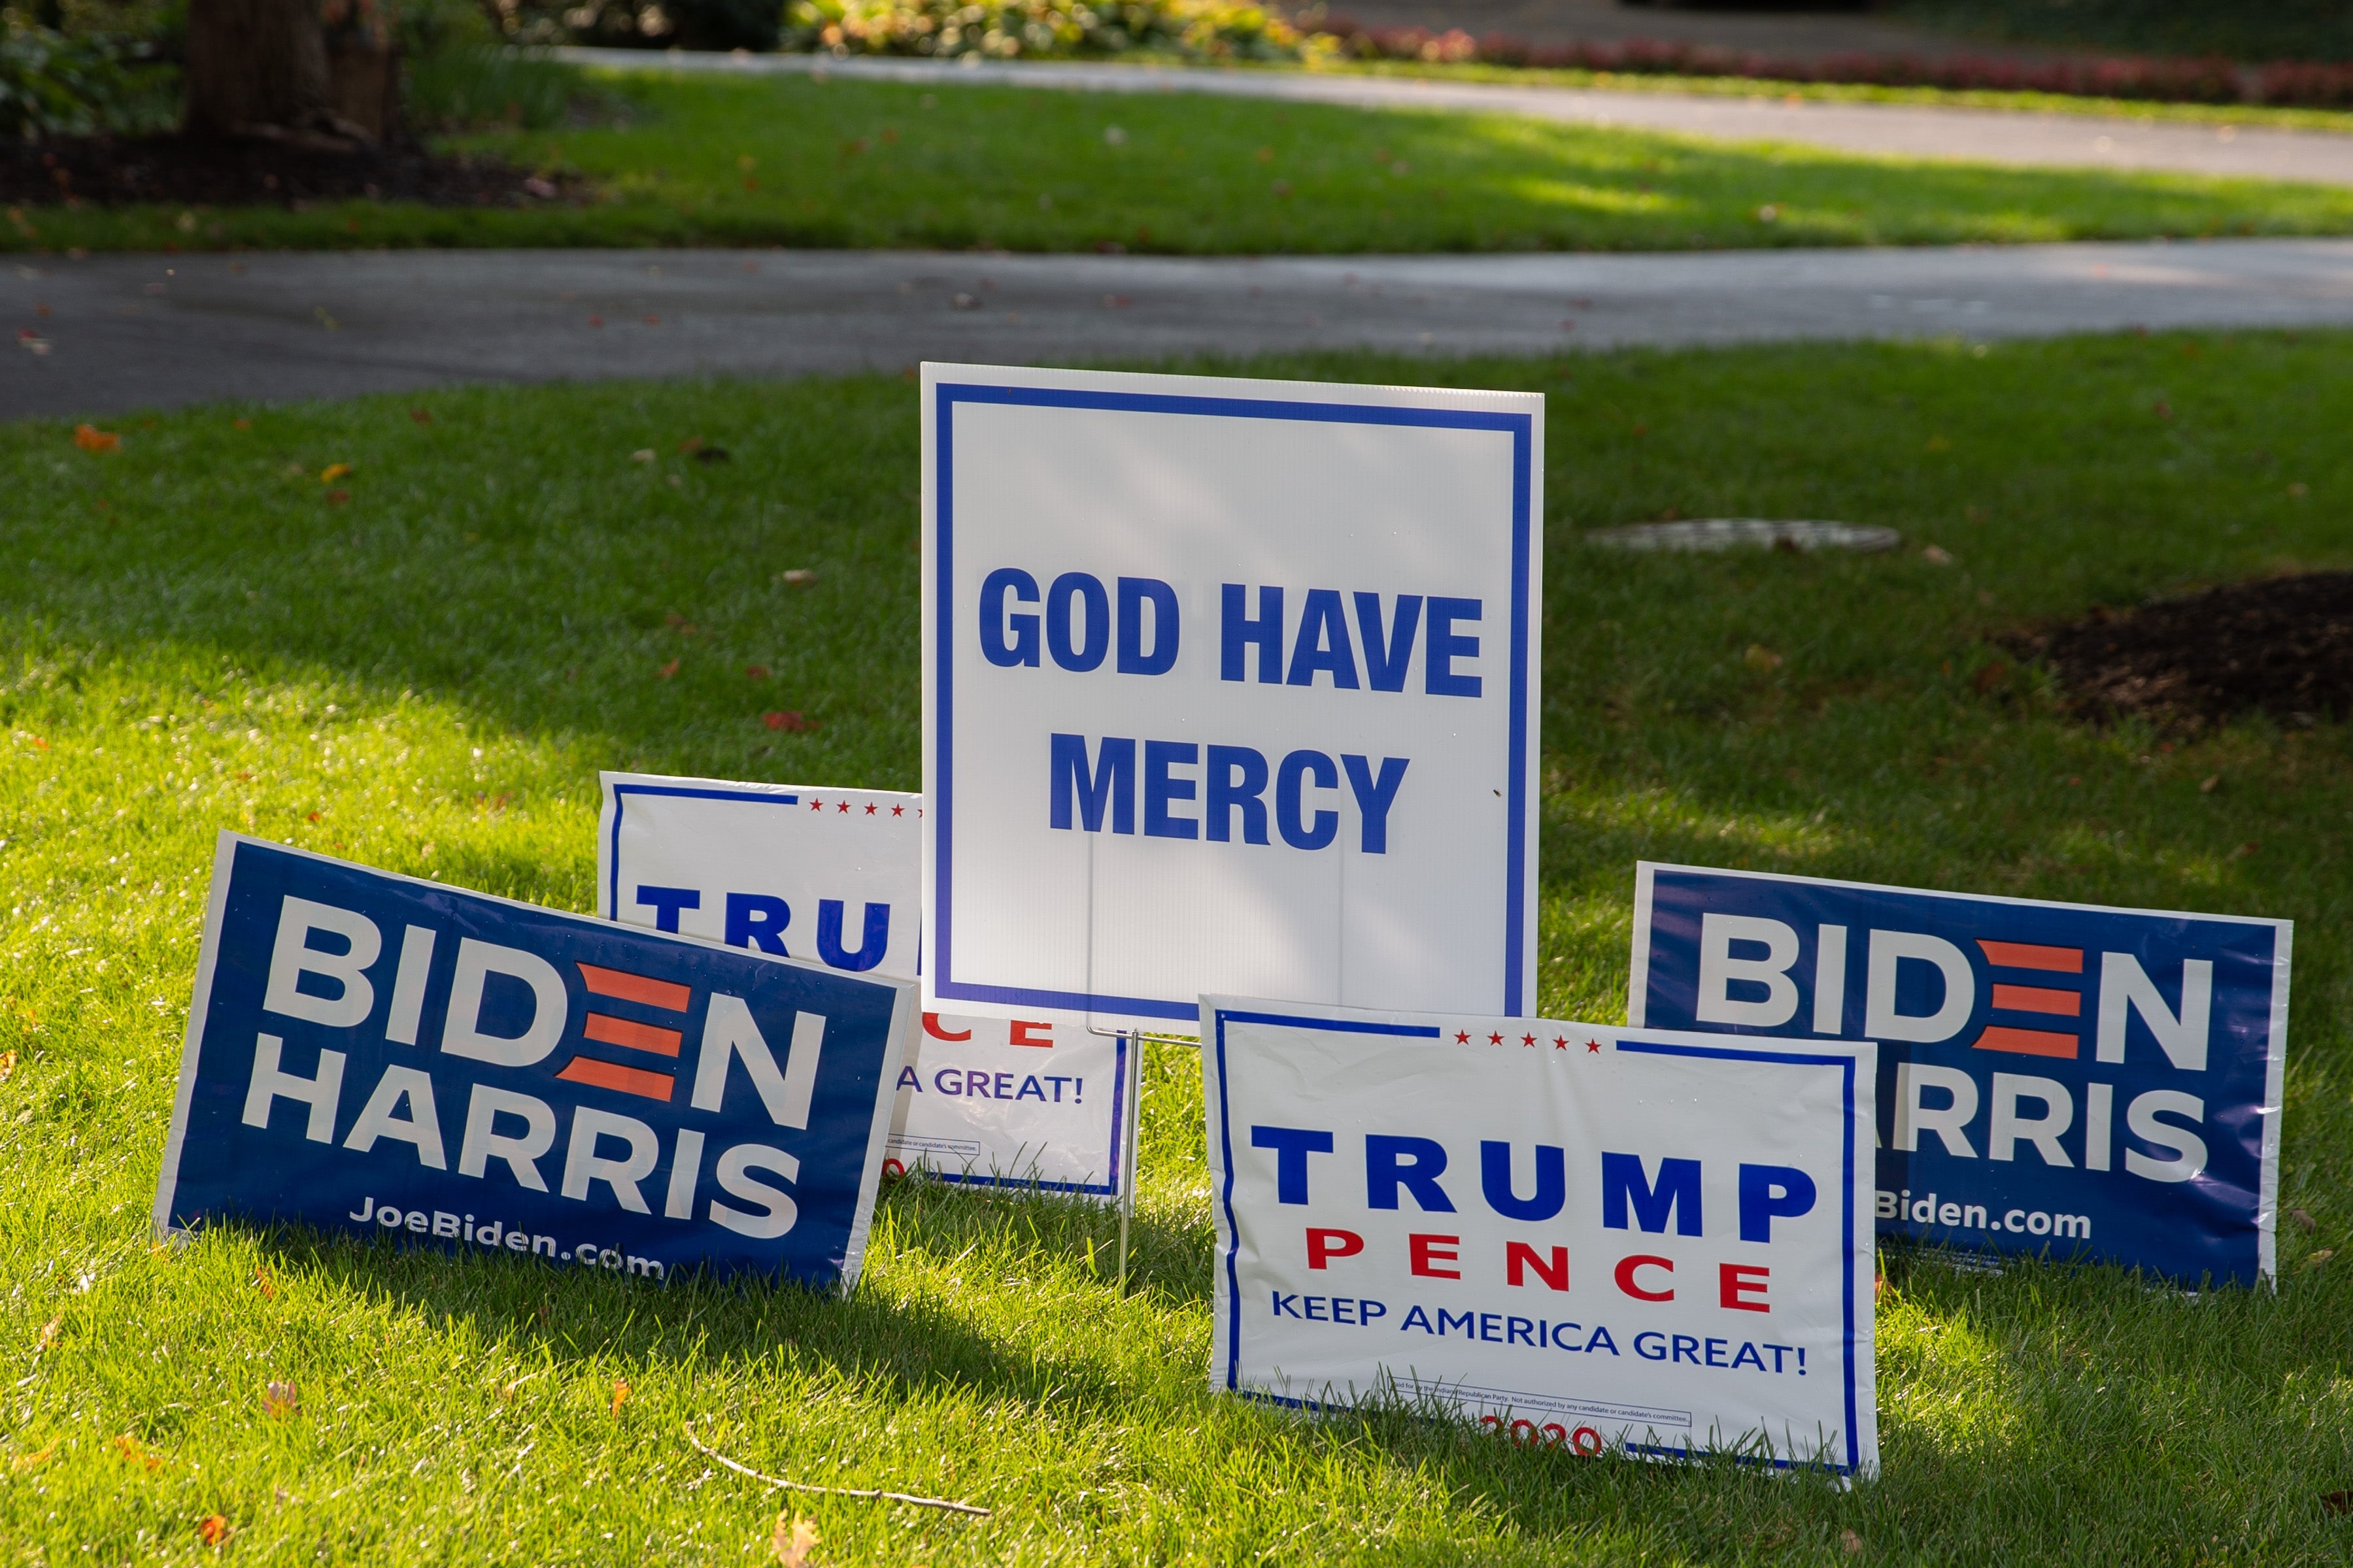 Biden and Trump lawn signs posted next to one another in the grass.